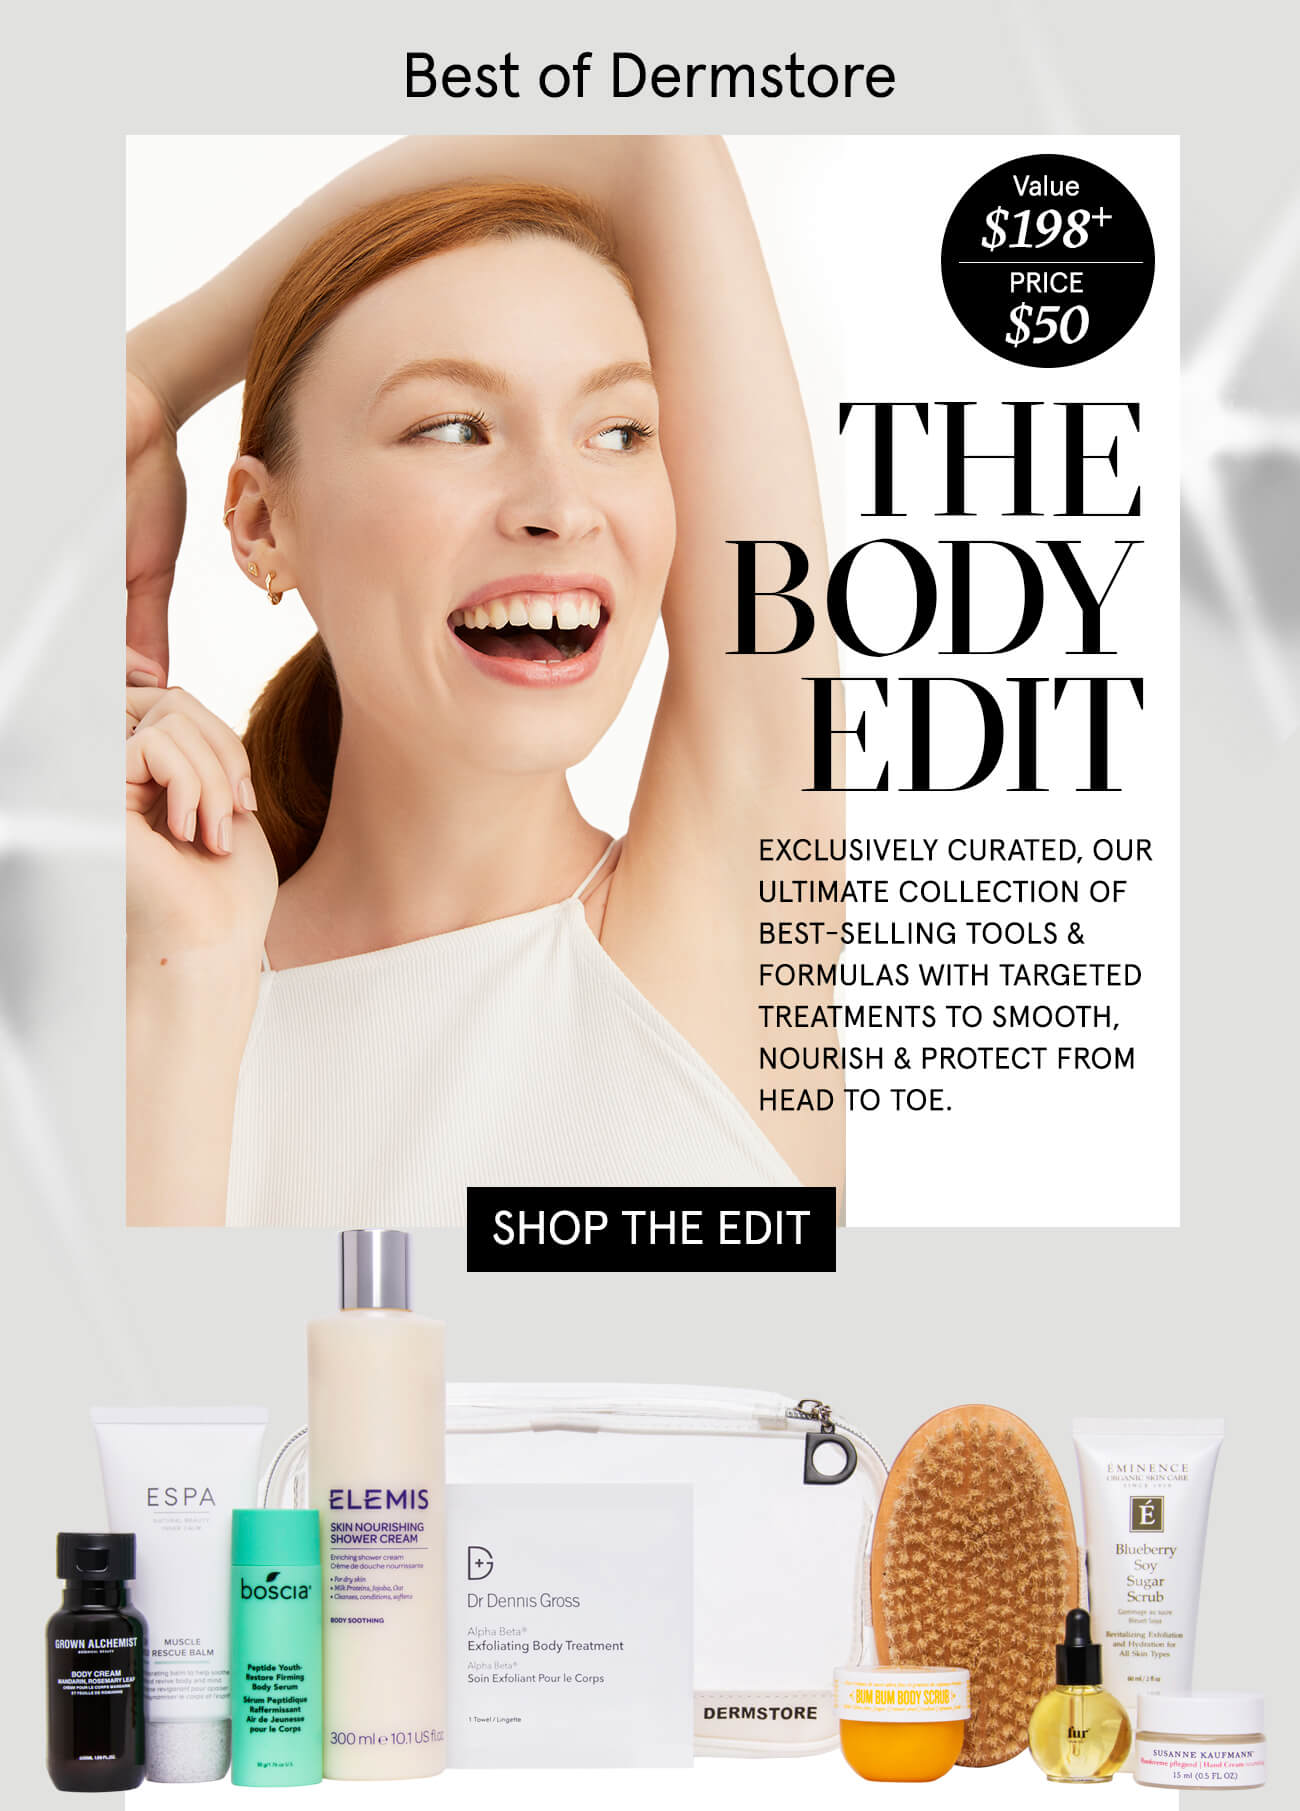 Dermstore Sale: Get The Best of Dermstore Body Edit – A $198 Value For Only $50!